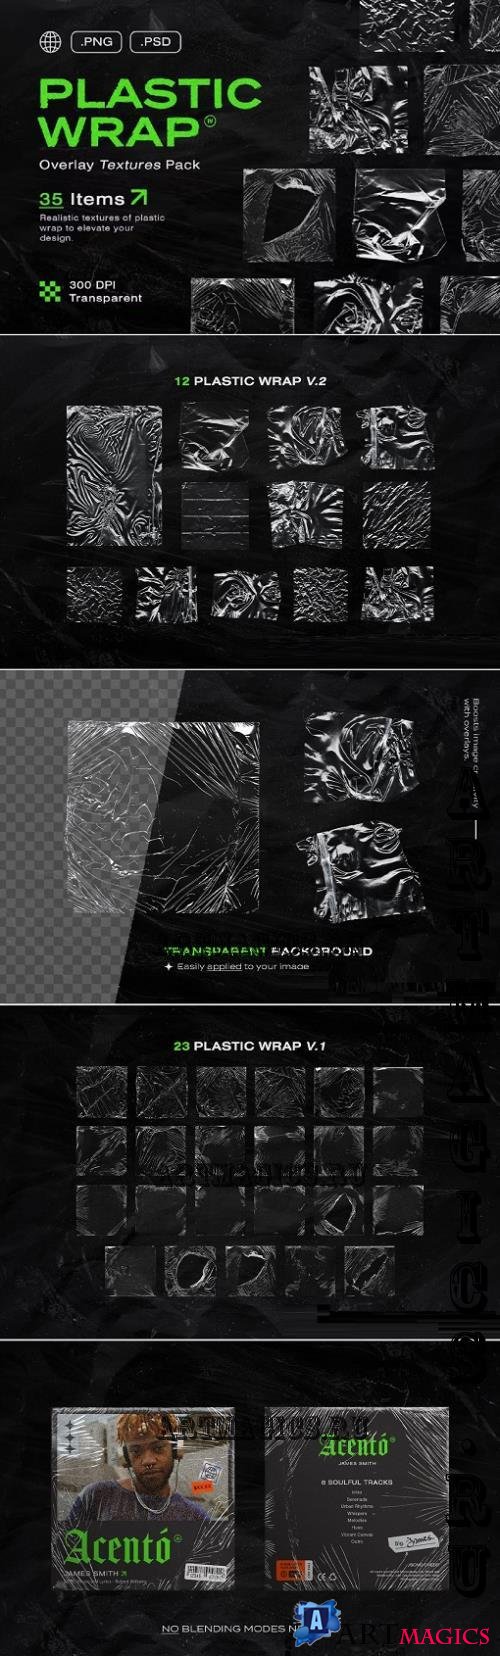 Plastic Wrap Overlay Textures Pack - 4EQWLNH